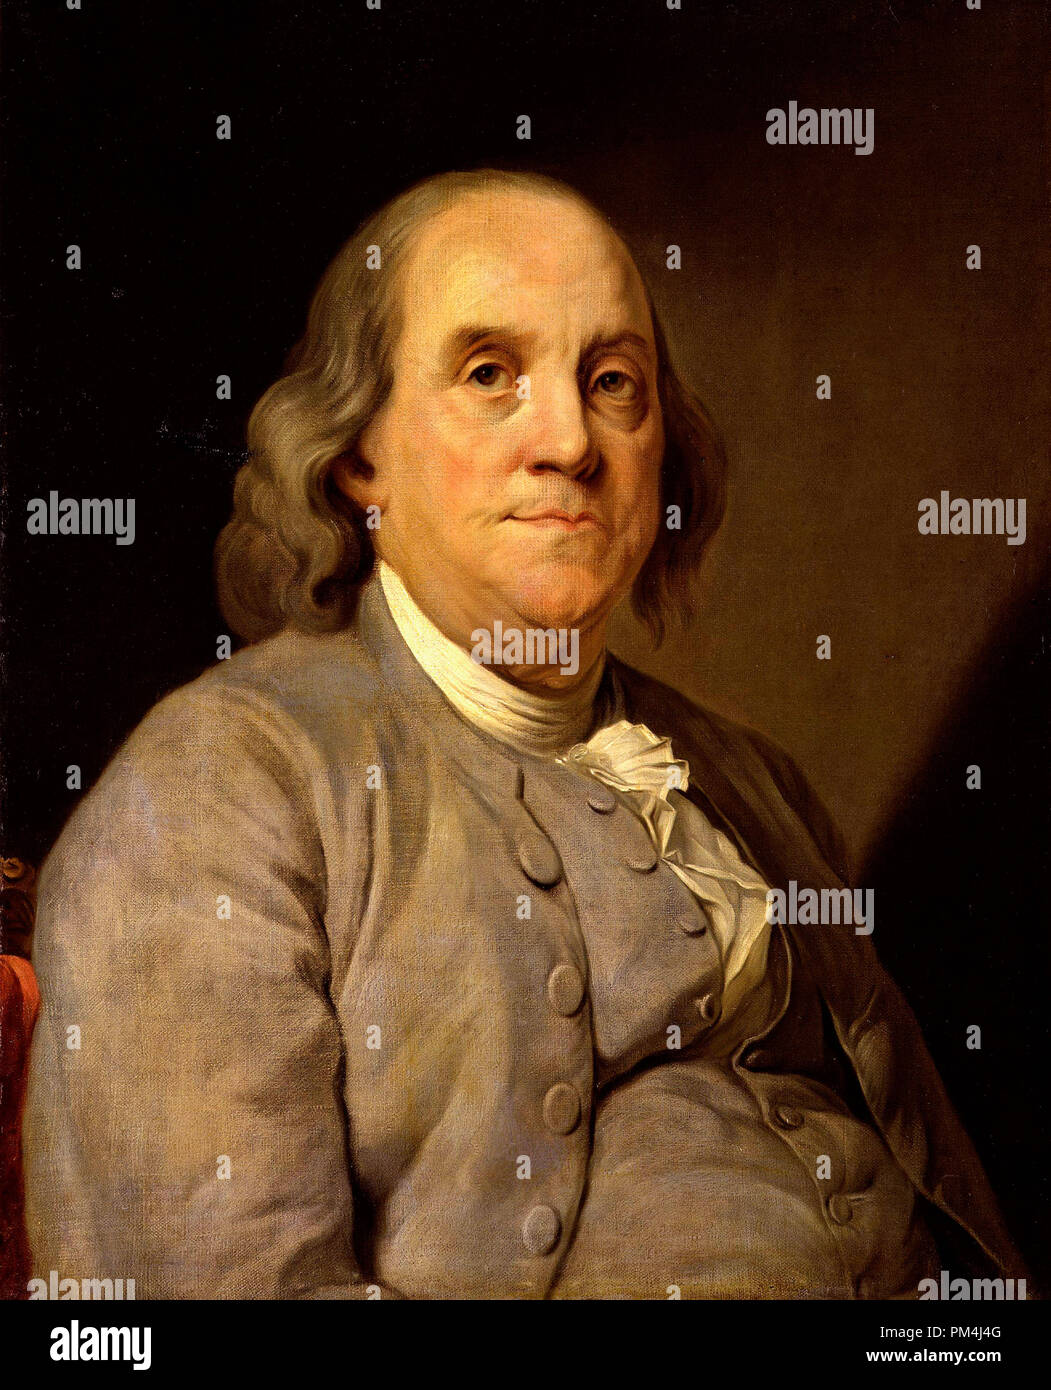 Portrait of Benjamin Franklin. Original painting by Joseph-Siffrein Duplessis in circa 1785   File Reference # 1003 518THA Stock Photo